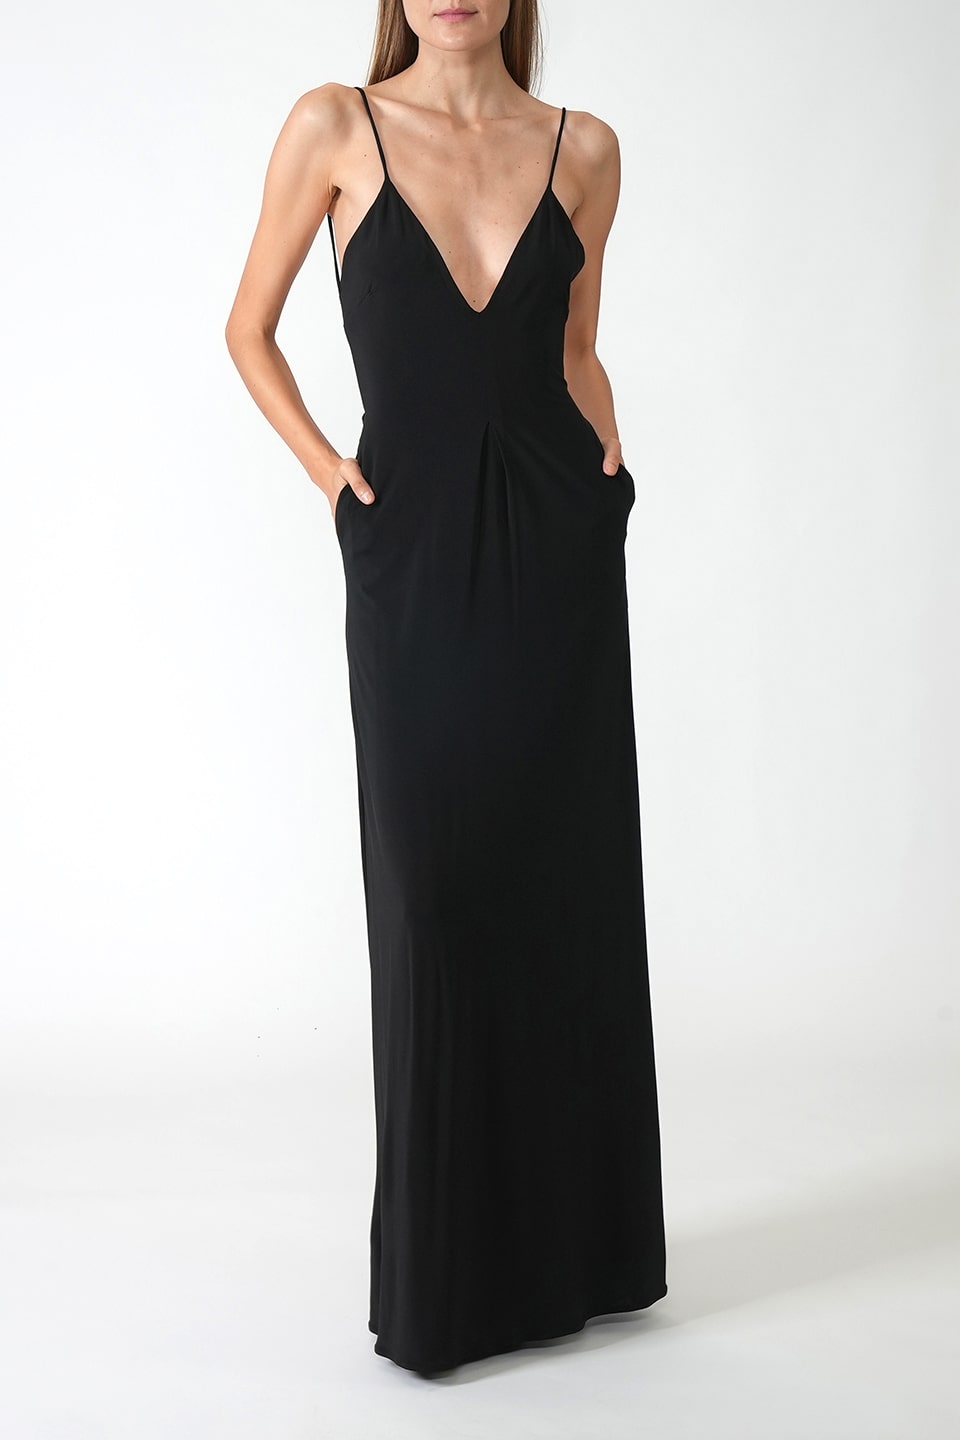 Shop online trendy Black Maxi dresses from Federica Tosi Fashion designer. Product gallery 1